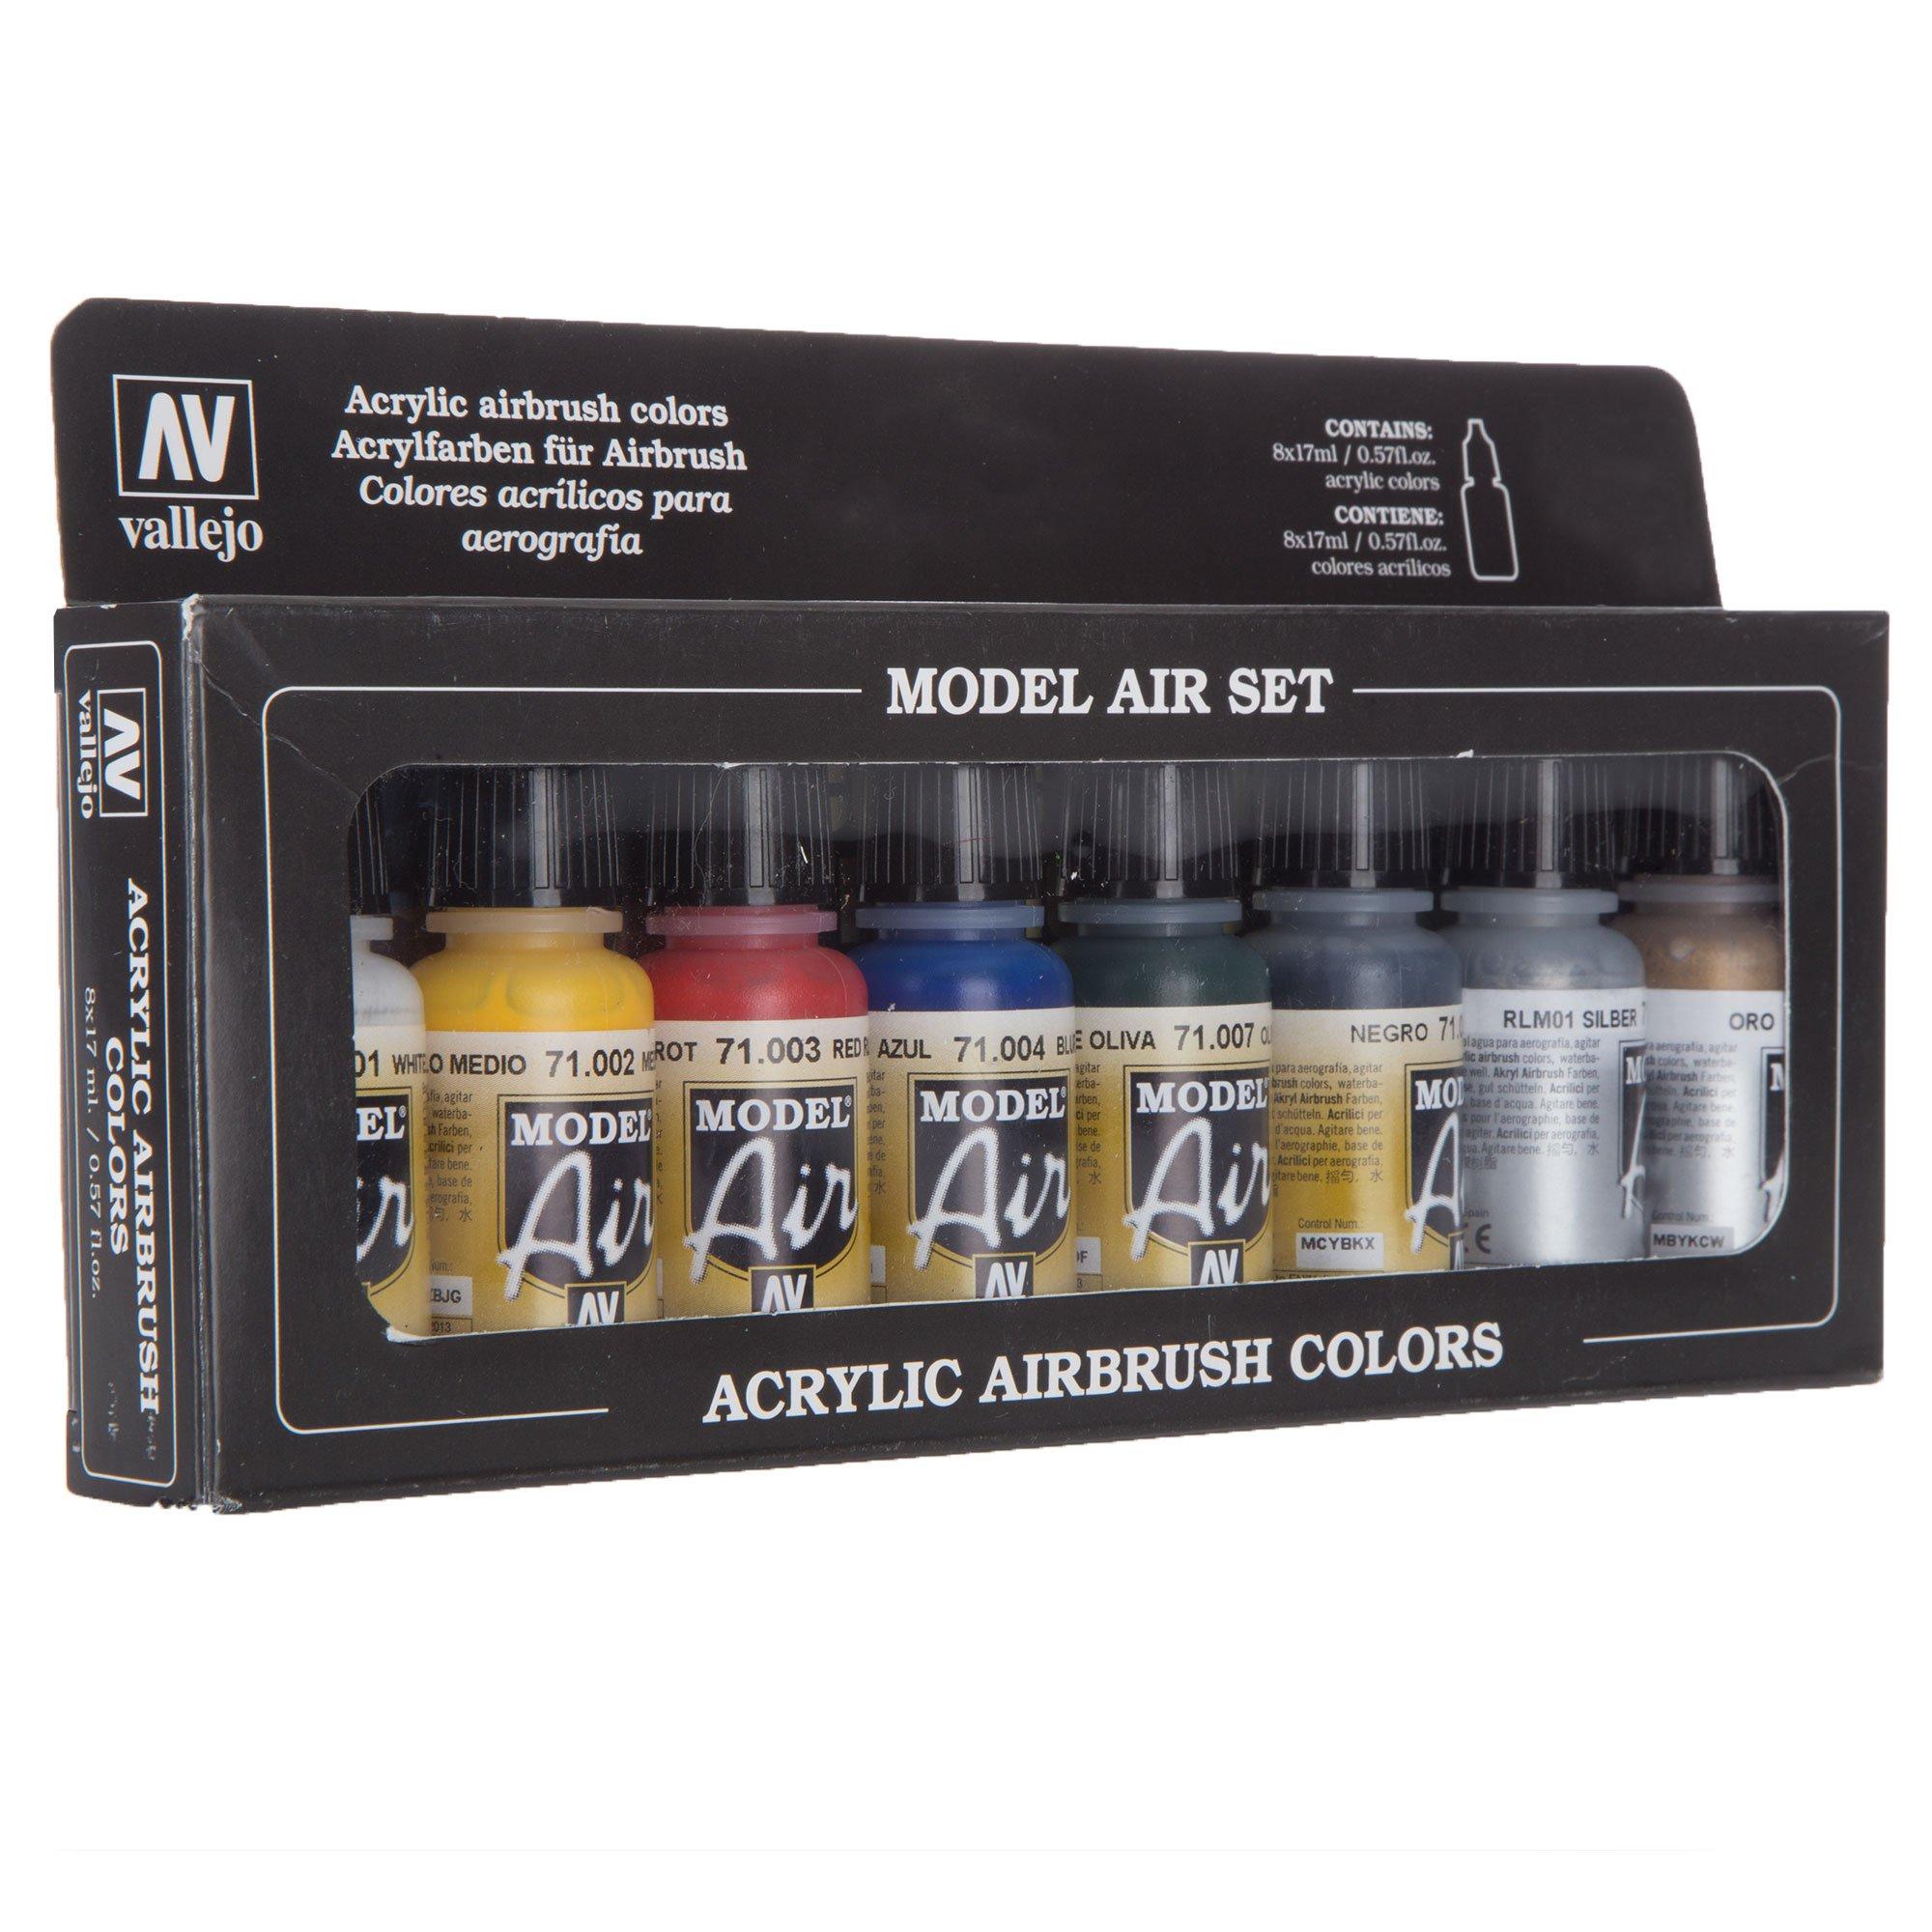 Airbrush Flow Improver 32ml - Tools & Paint Reviews 